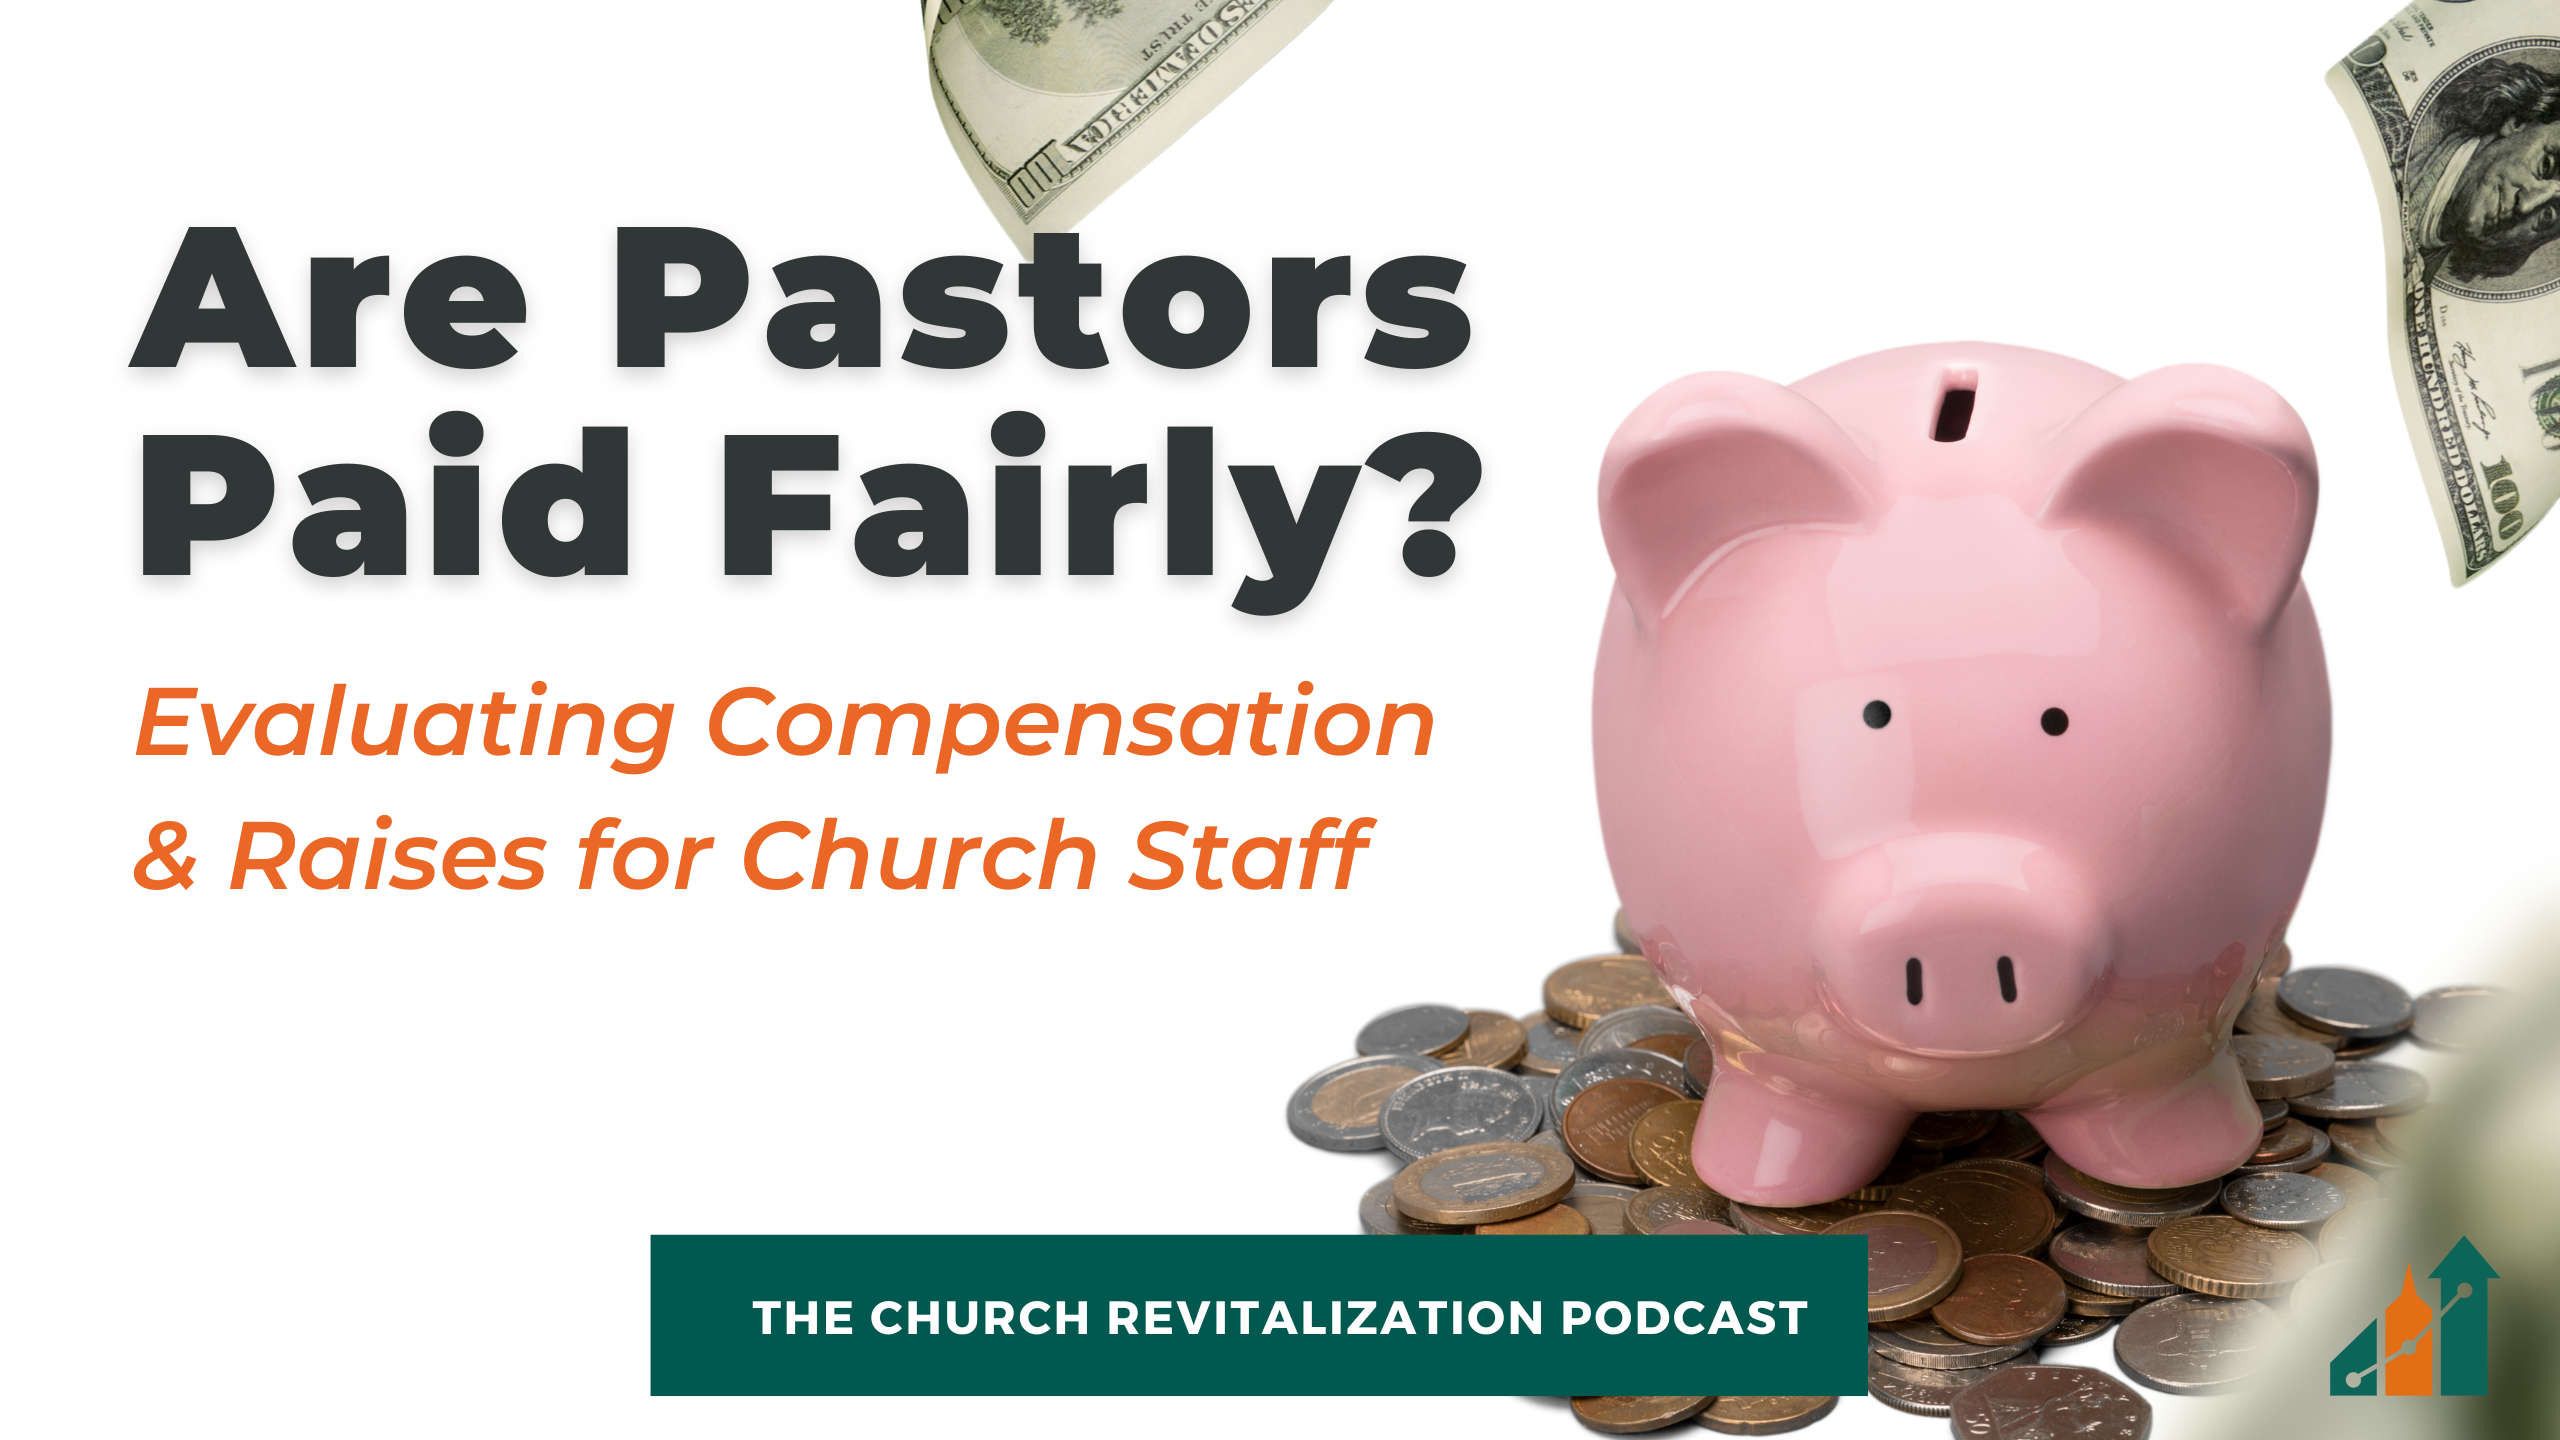 Are Pastors Paid Fairly